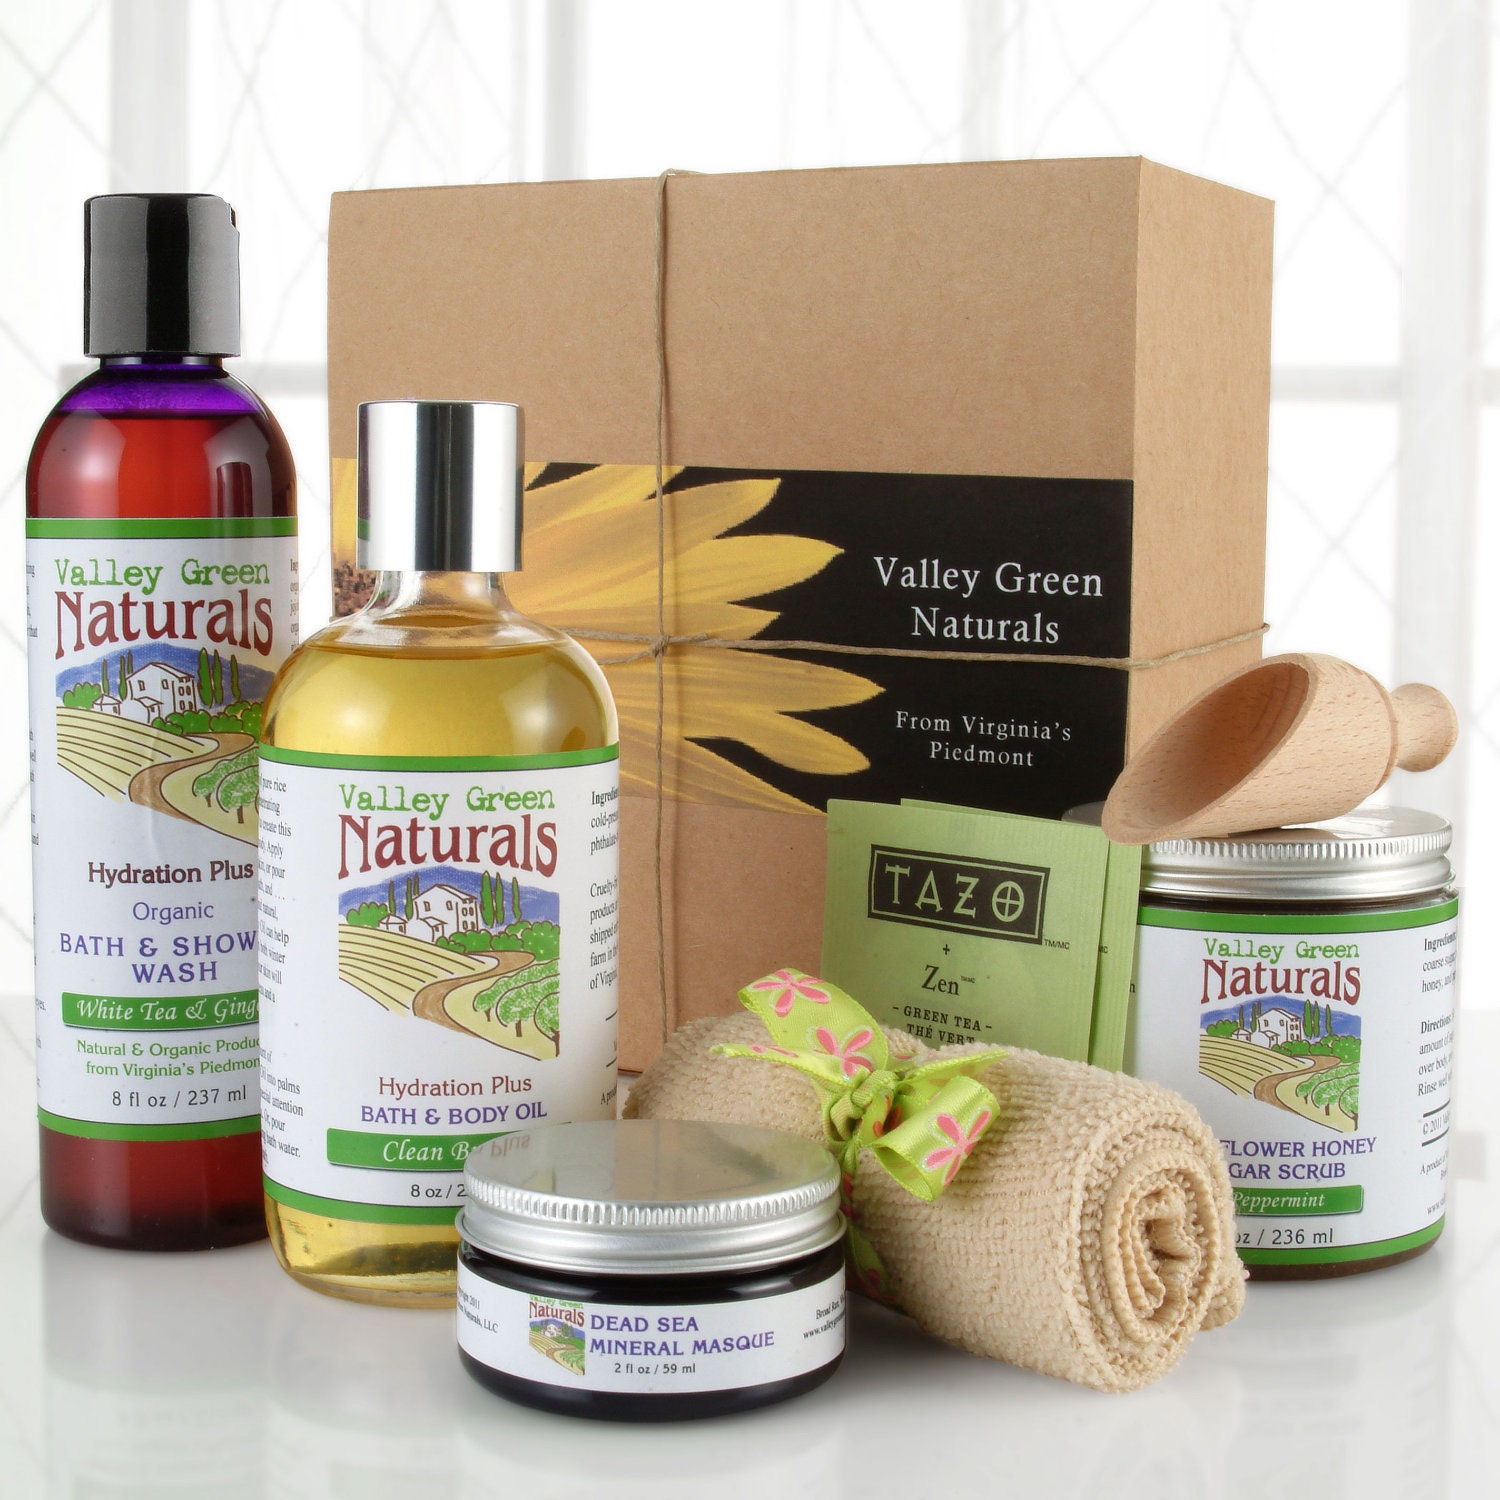 A Day at the Spa Gift Box, by Valley Green Naturals